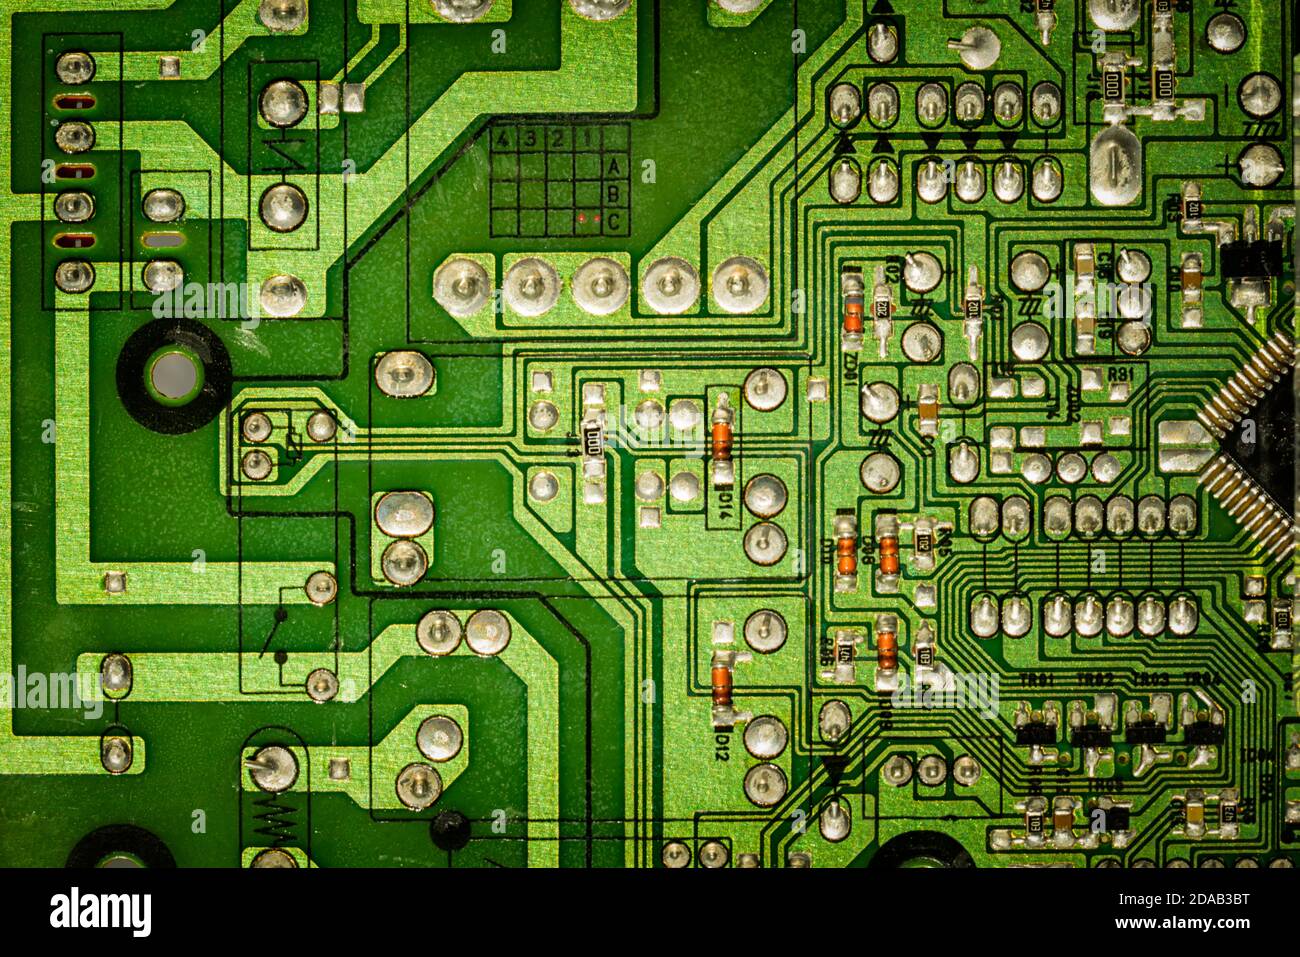 Green electronic system computer motherboard Stock Photo